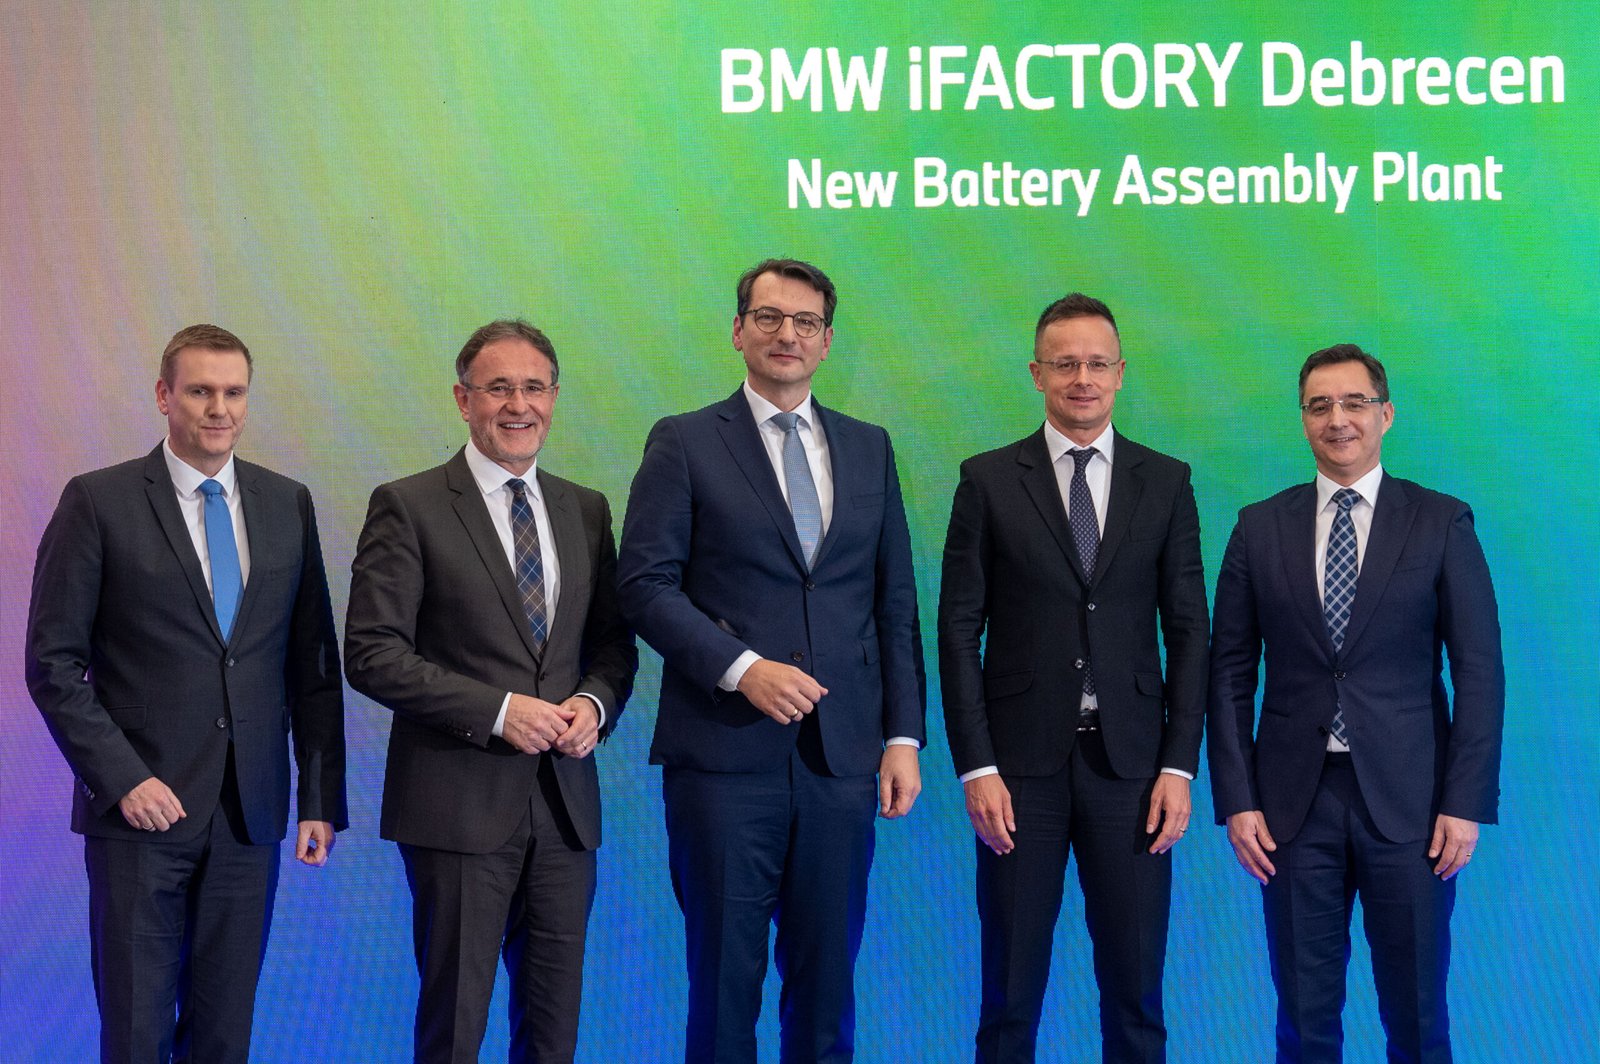 BMW Group will invest more than 2 billion euros in the Hungarian plant Debrecen by 2025